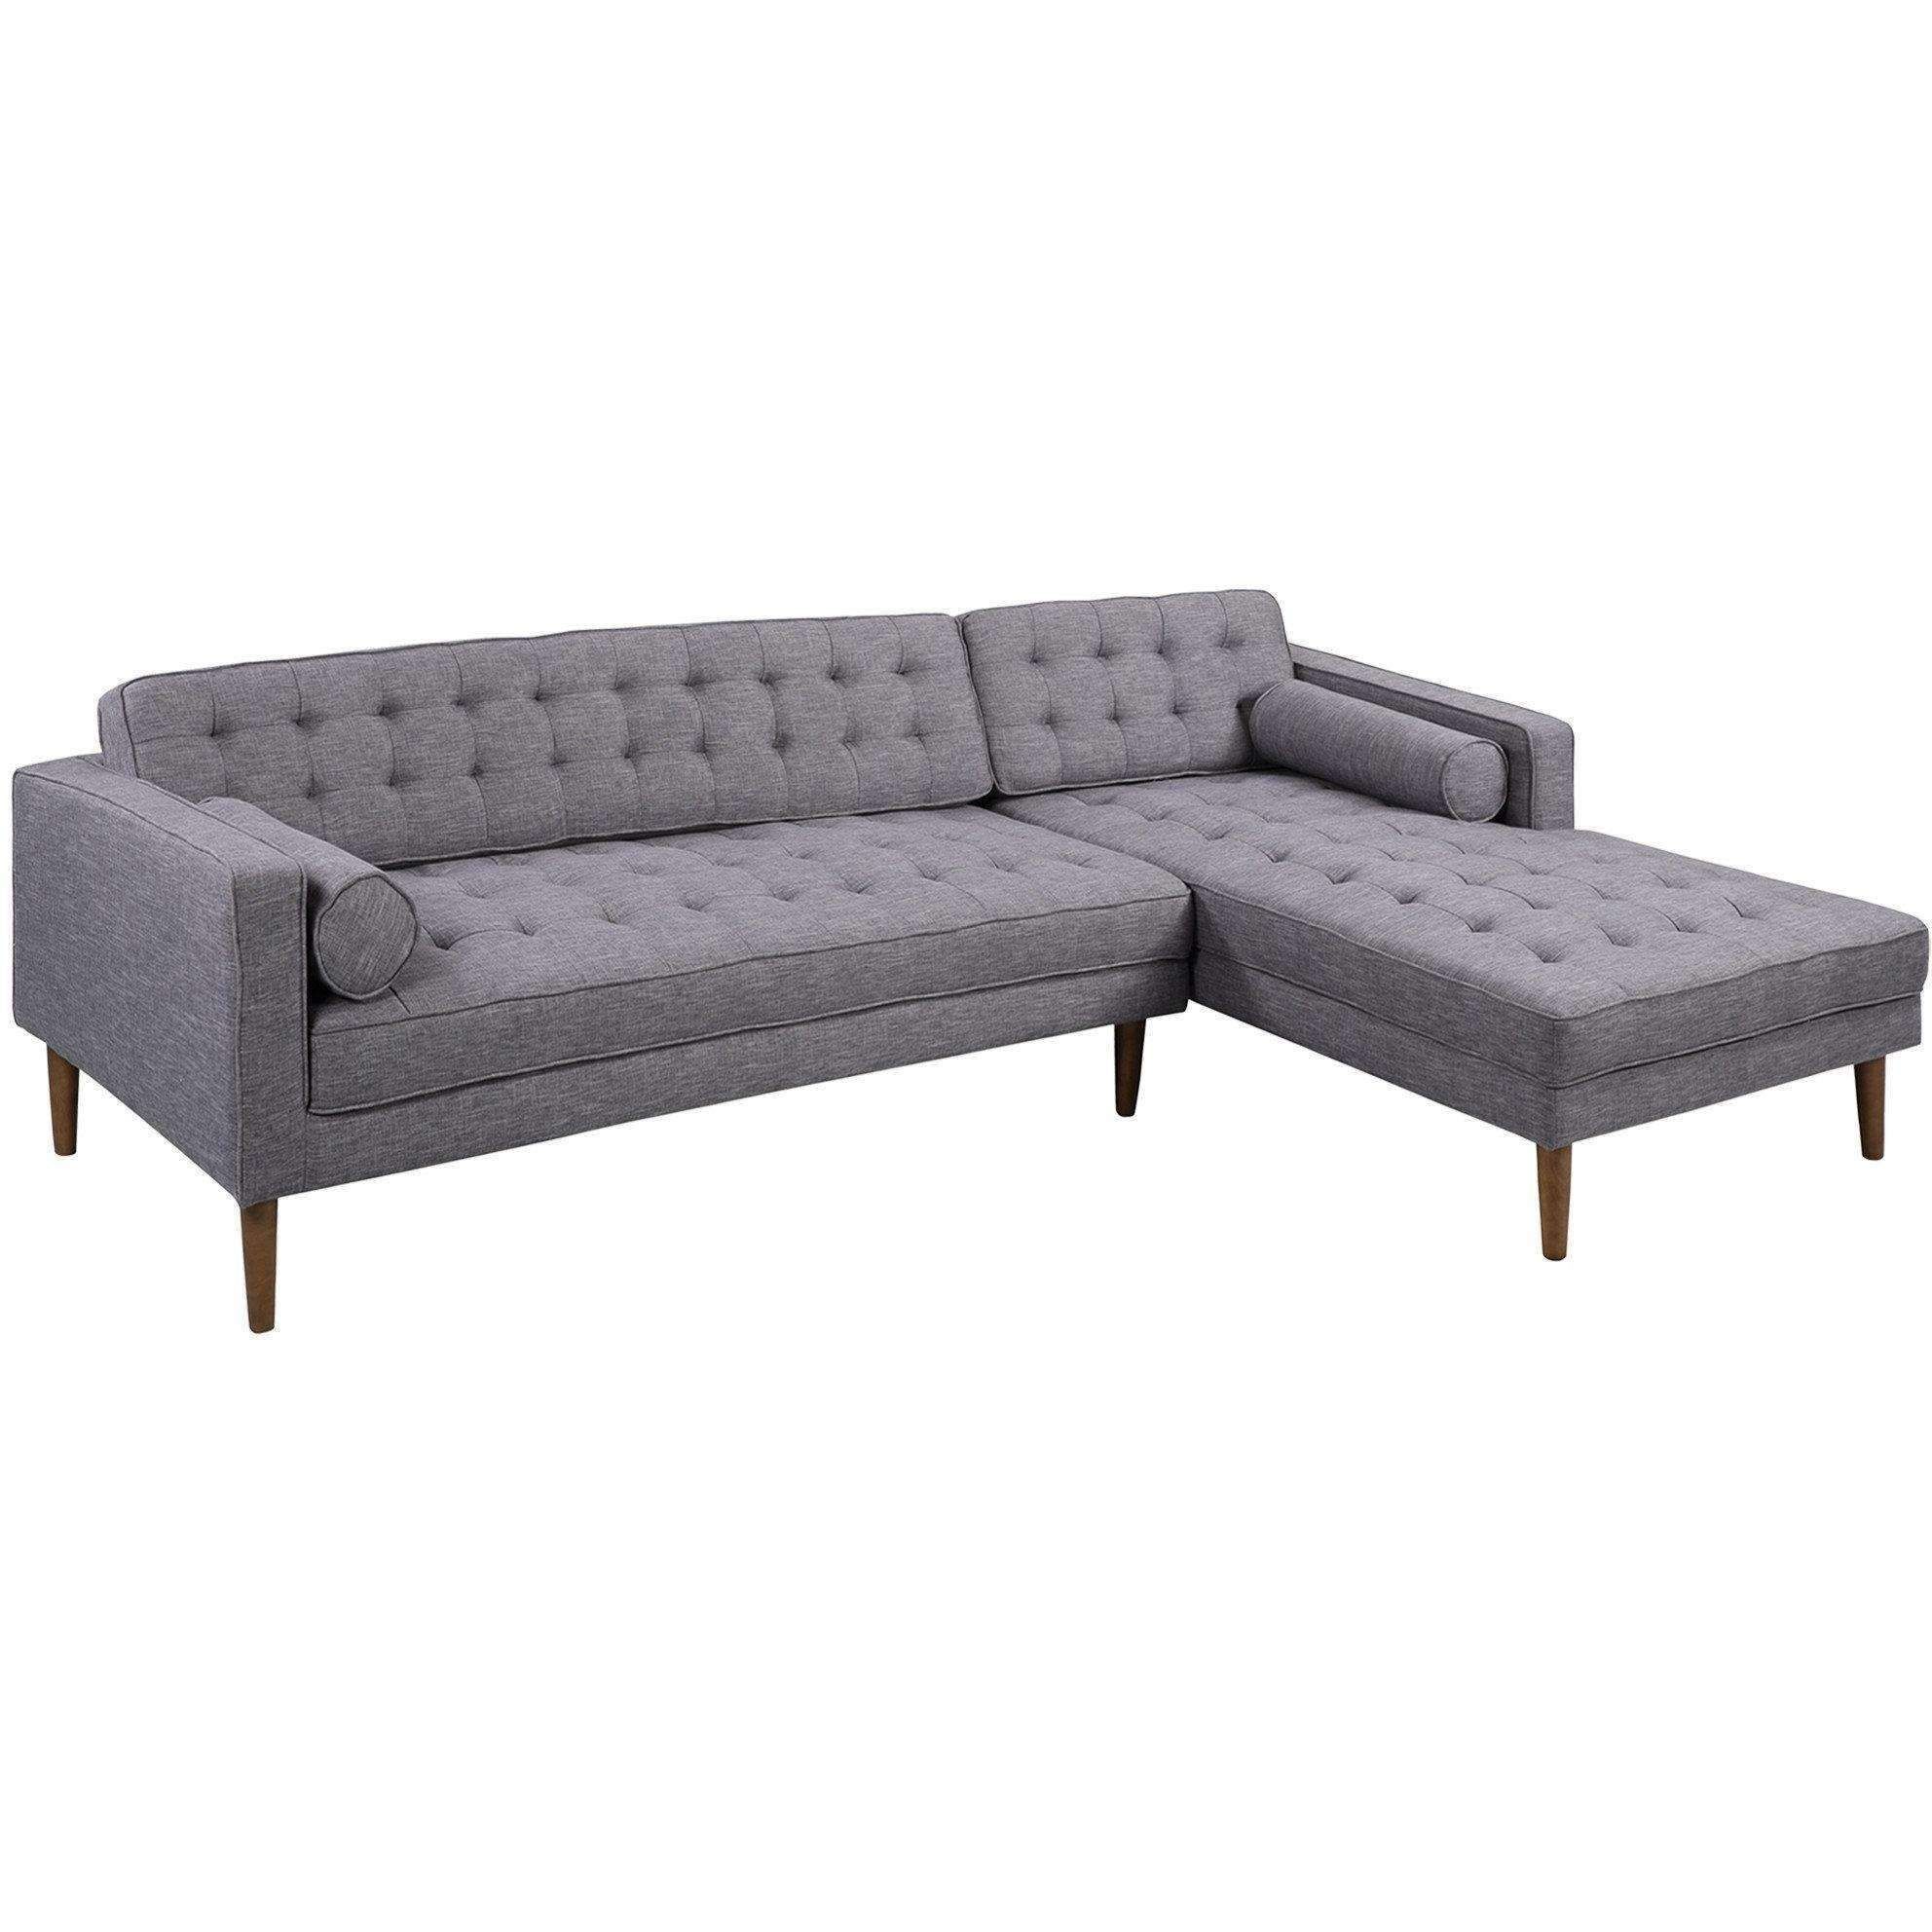 Armen Living Element Right Side Chaise Sectional In Dark Within Element Left Side Chaise Sectional Sofas In Dark Gray Linen And Walnut Legs (View 3 of 15)